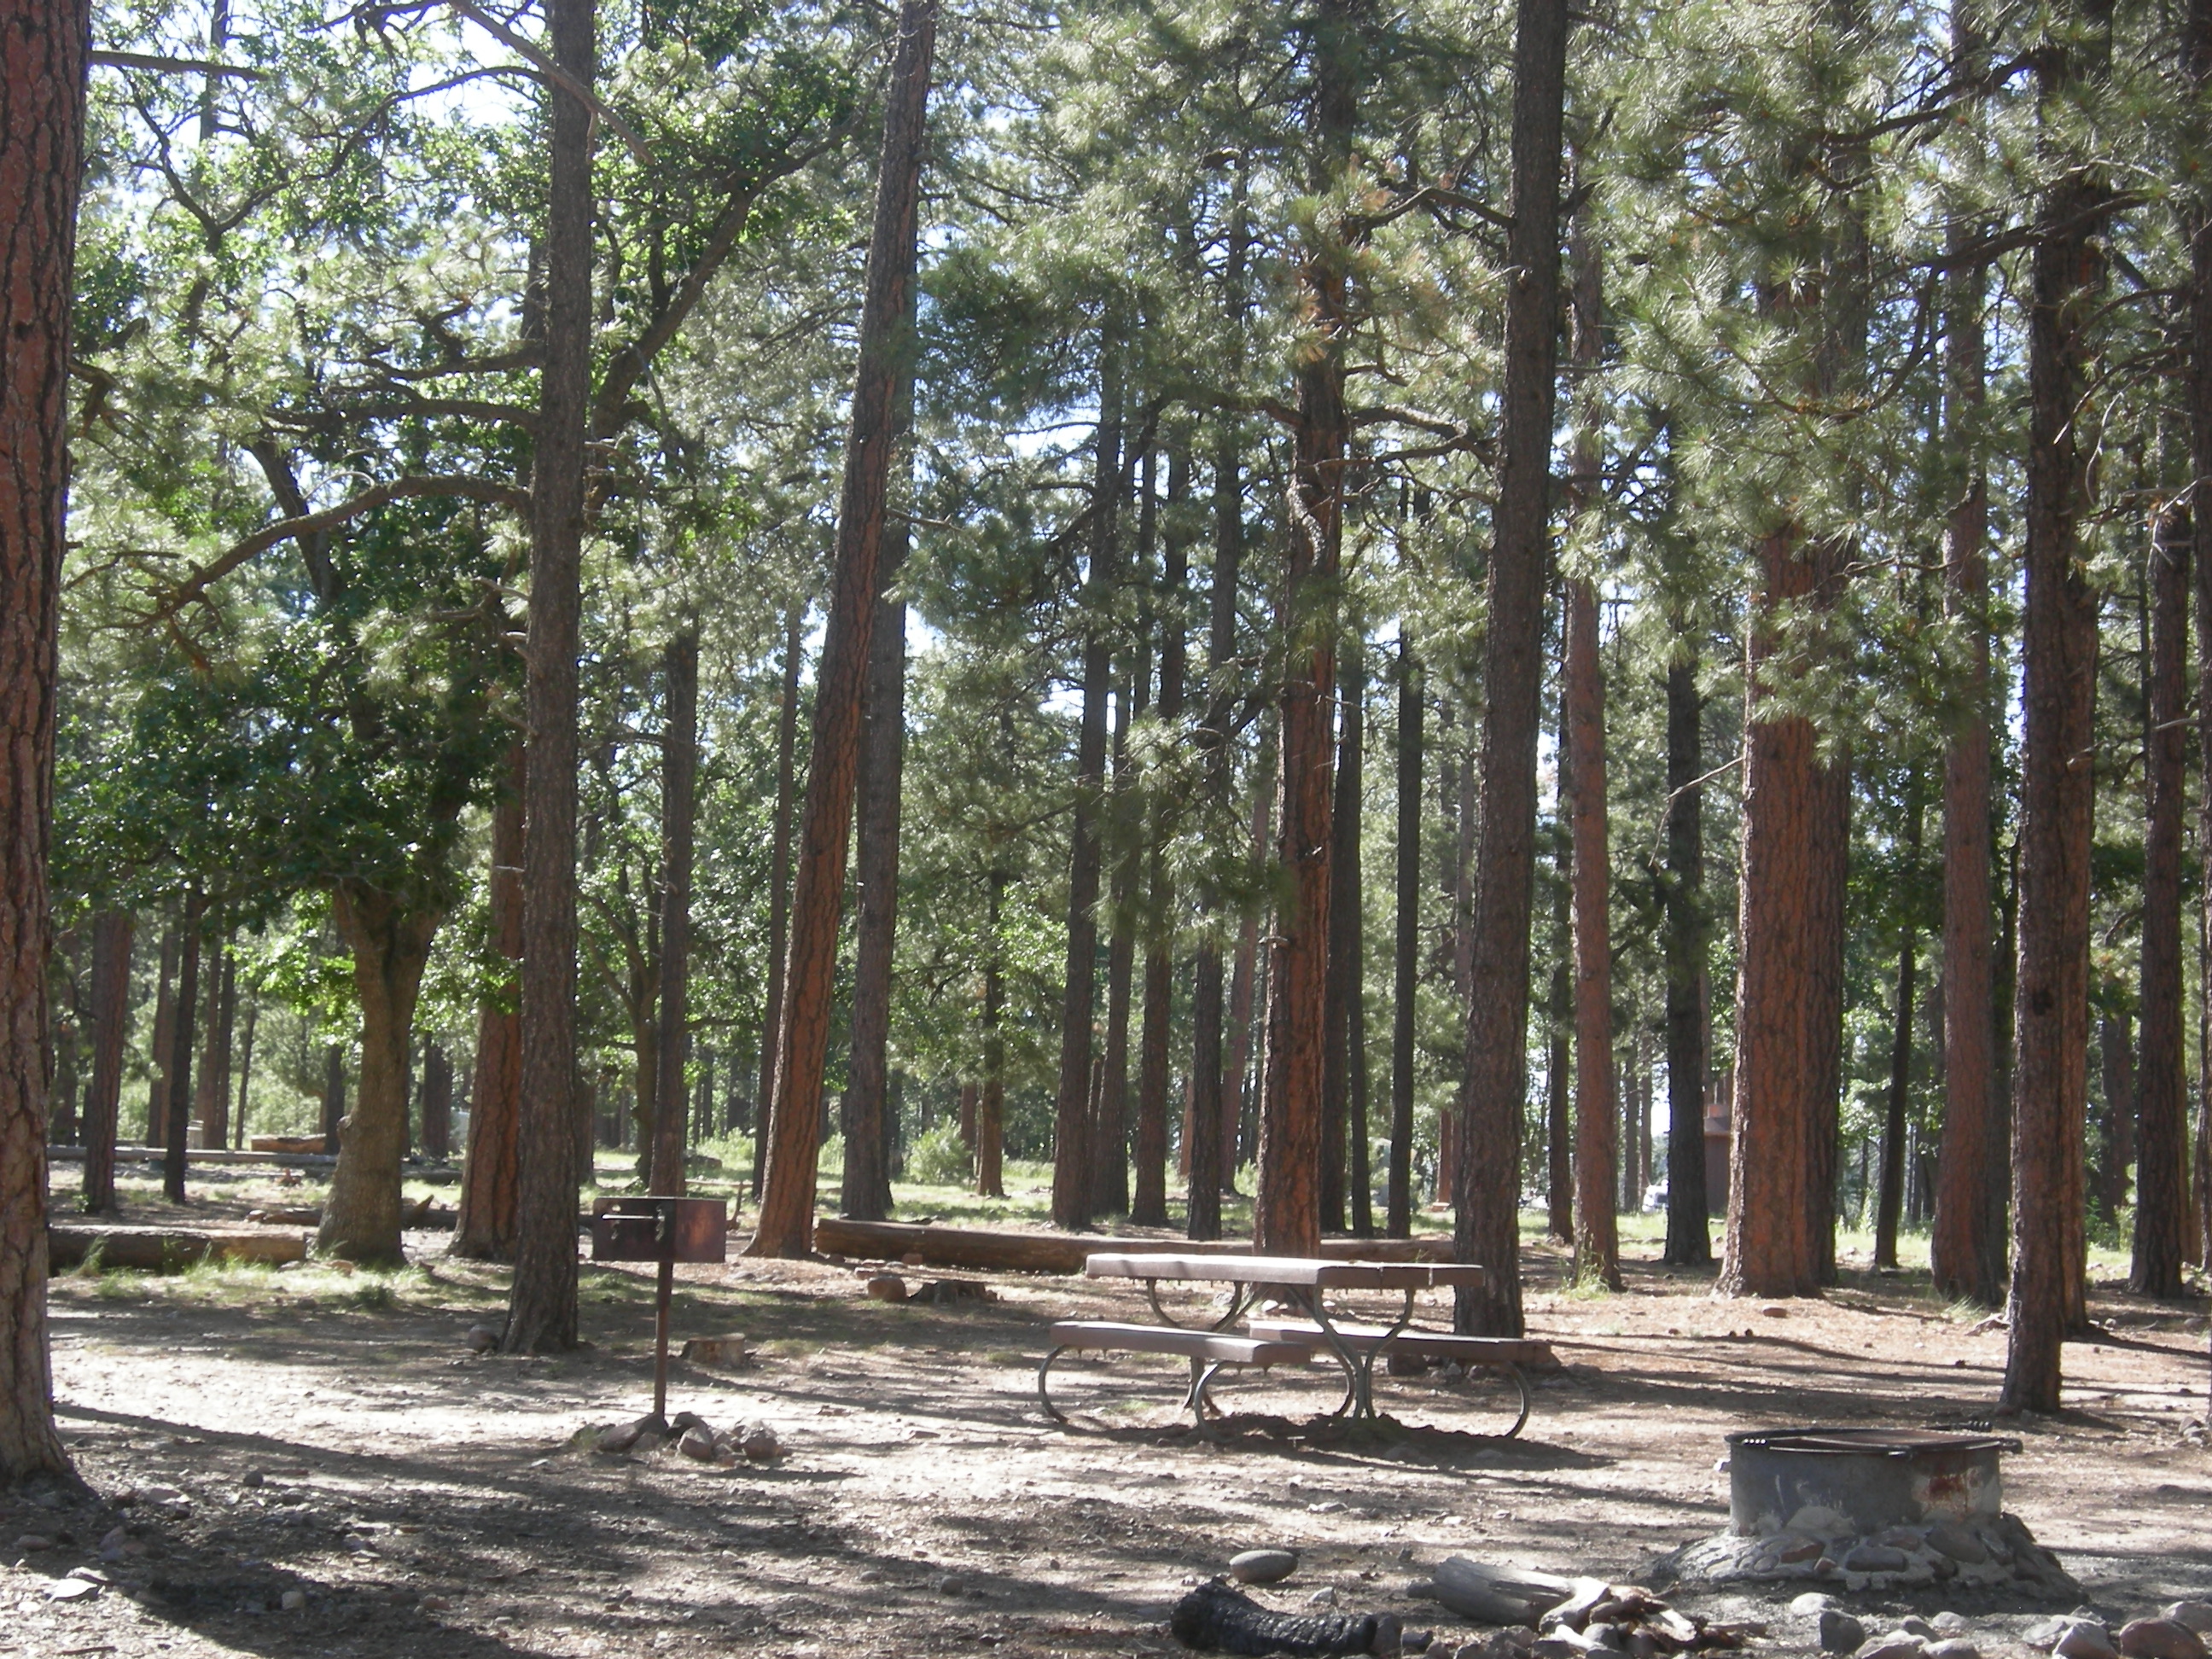 Restrooms at Upper Canyon Creek Campground